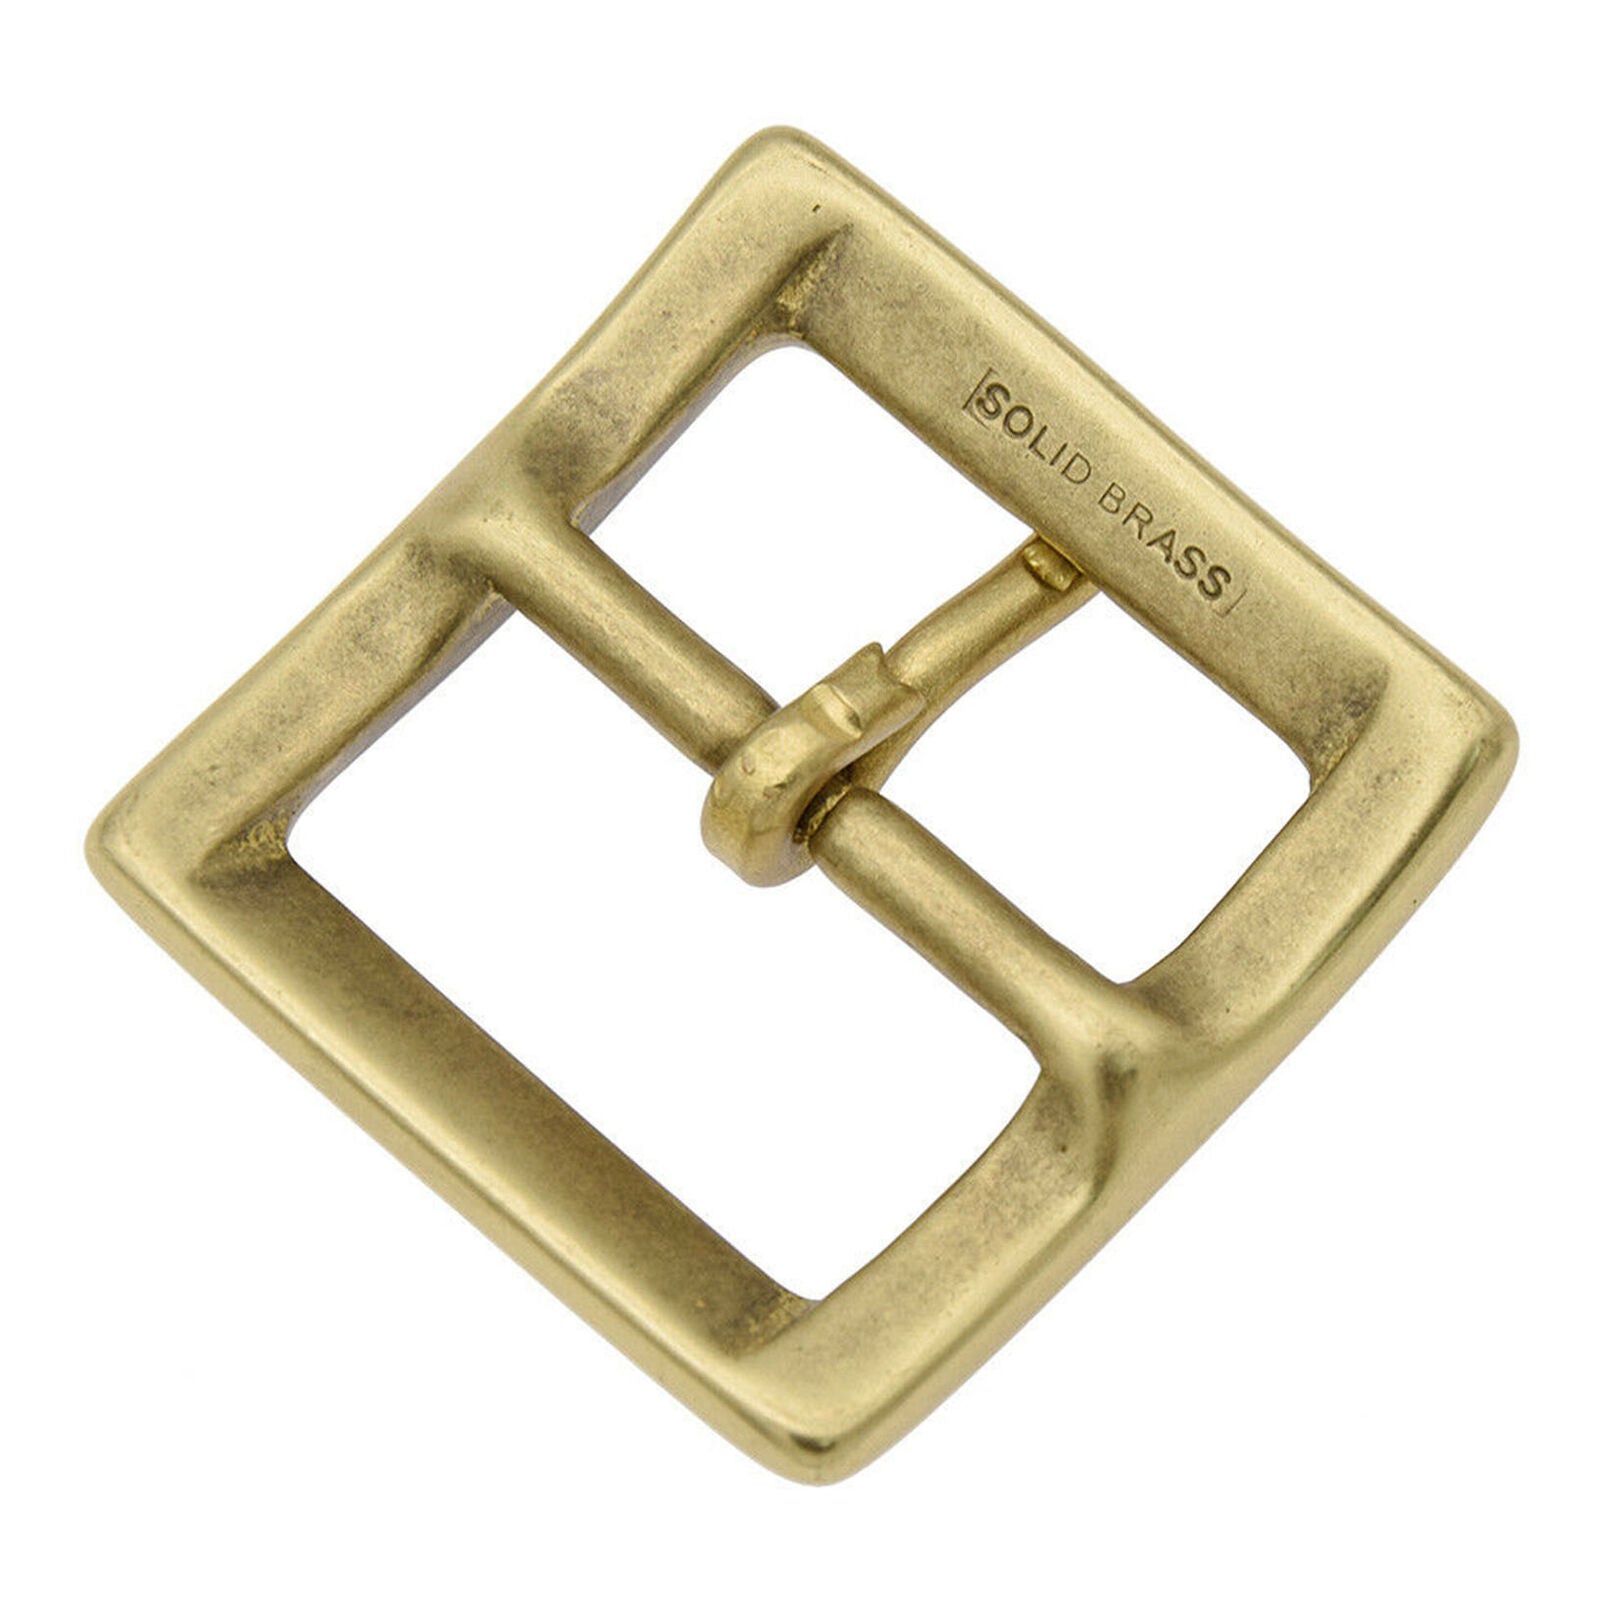 1x Polished Solid Brass Belt Buckle For 1.5inch Wide Belt Replacement Accessory